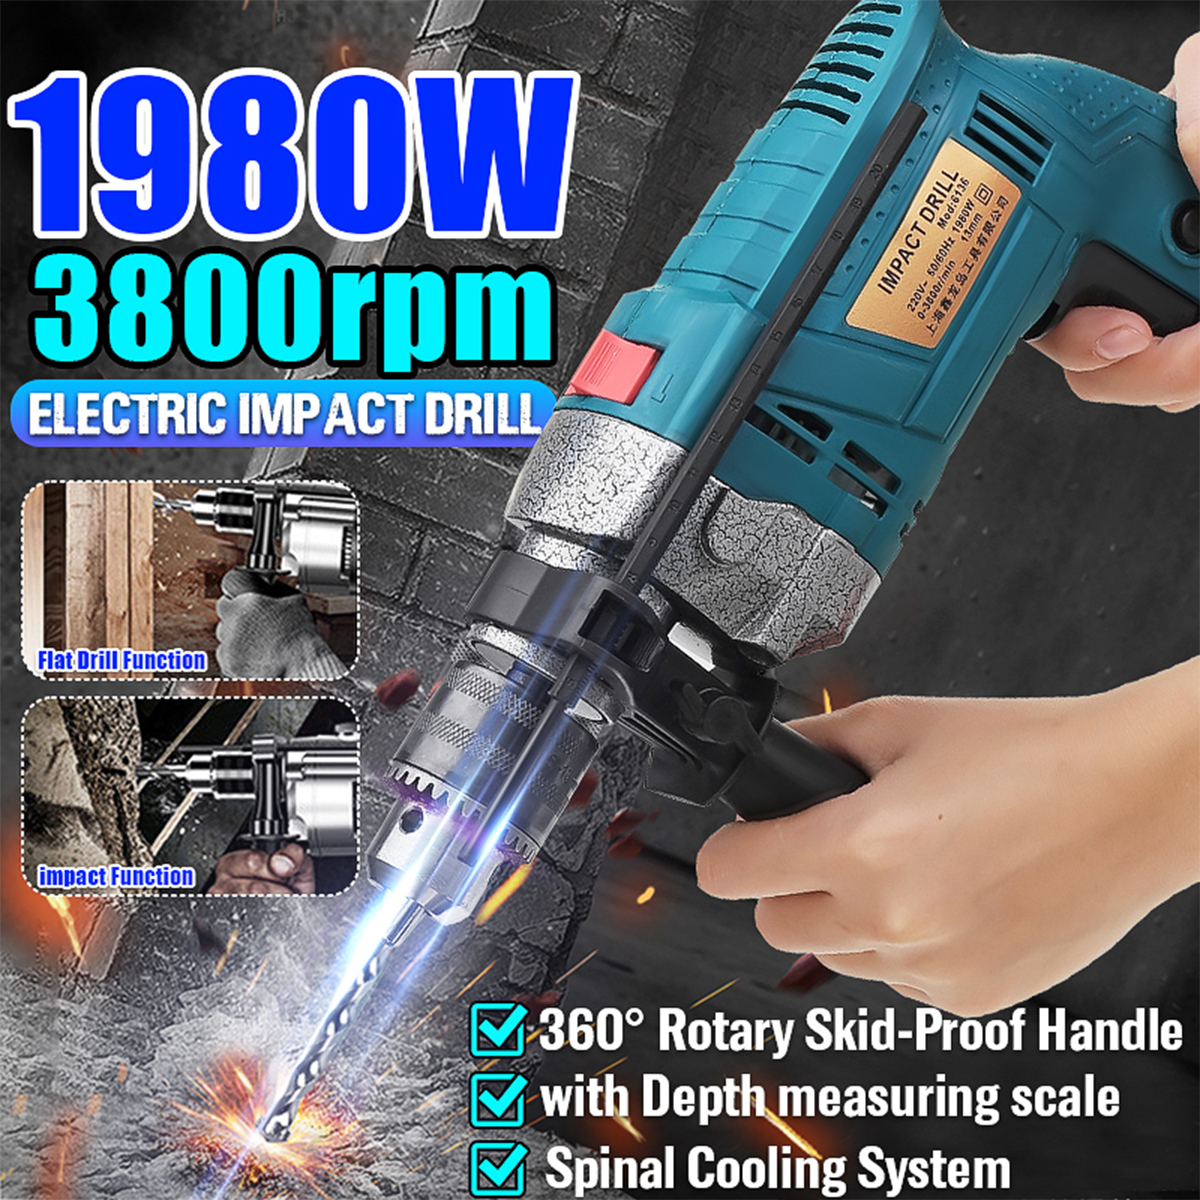 1980W-3800rpm-Electric-Impact-Drill-360deg-Rotary-Skid-Proof-Handle-With-Depth-Measuring-Scale-Spina-1715301-1